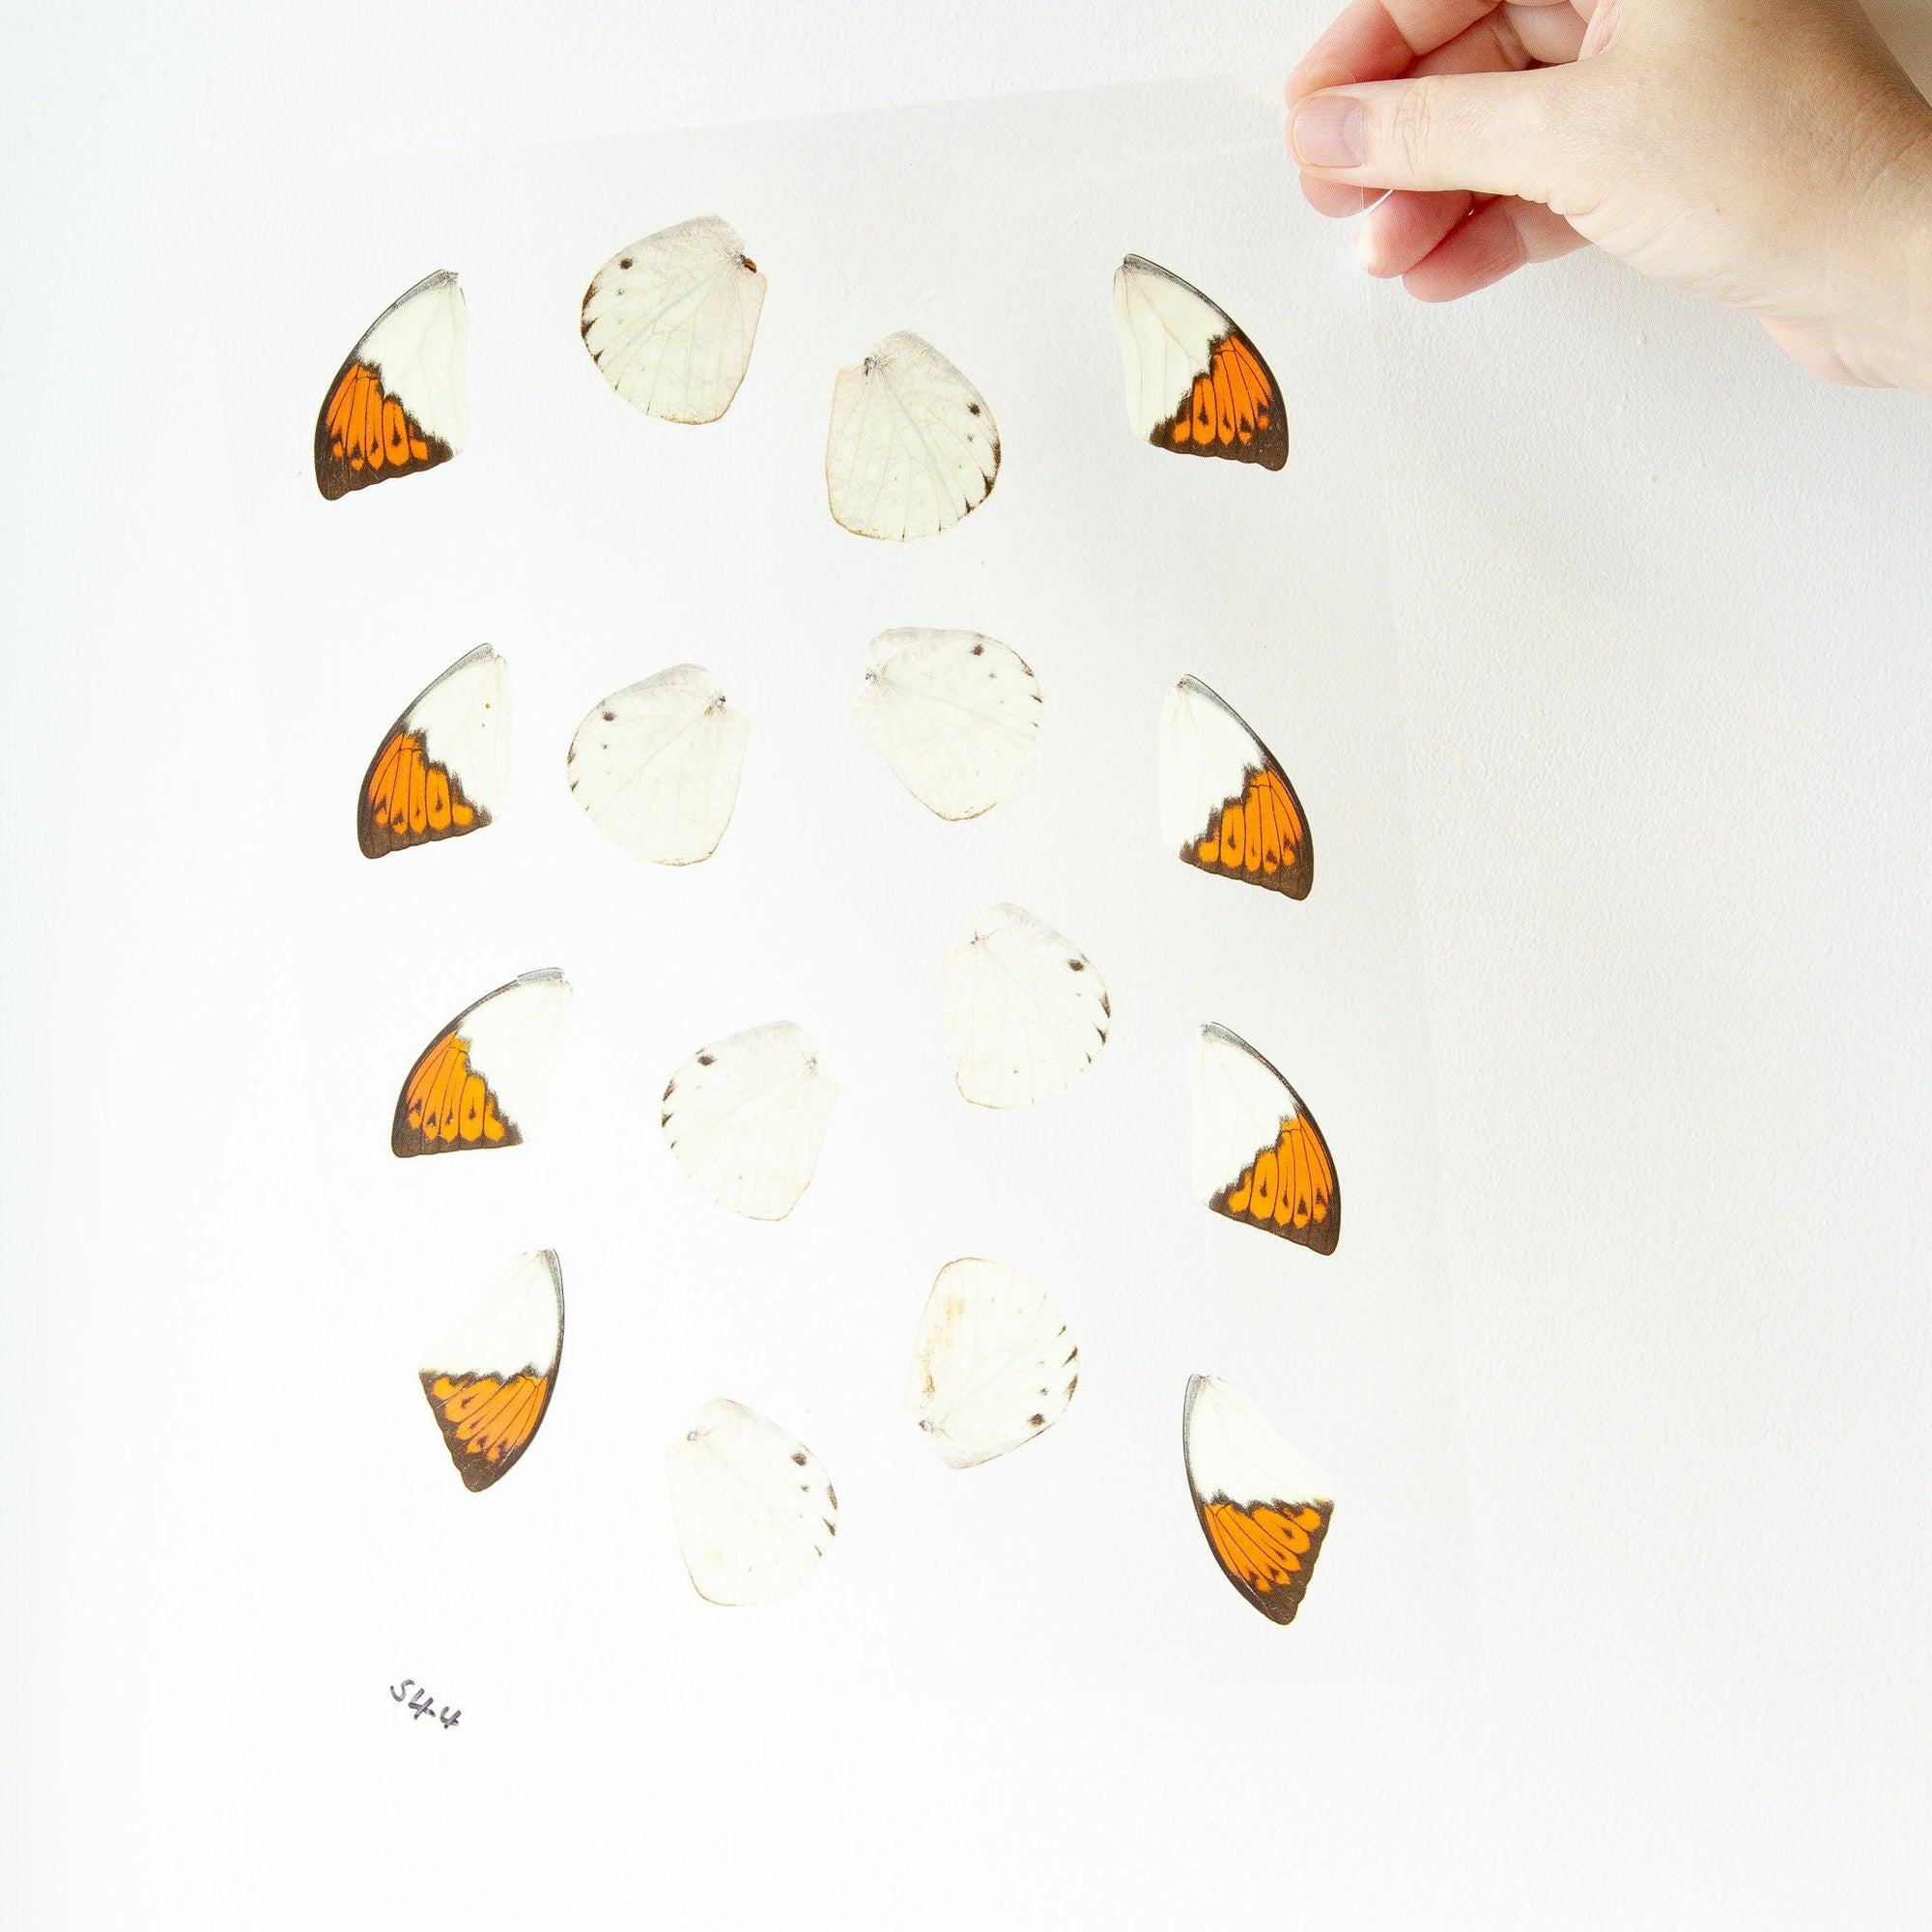 Butterfly Wings GLOSSY LAMINATED SHEET Real Ethically Sourced Specimens Moths Butterflies Wings for Art -- S44